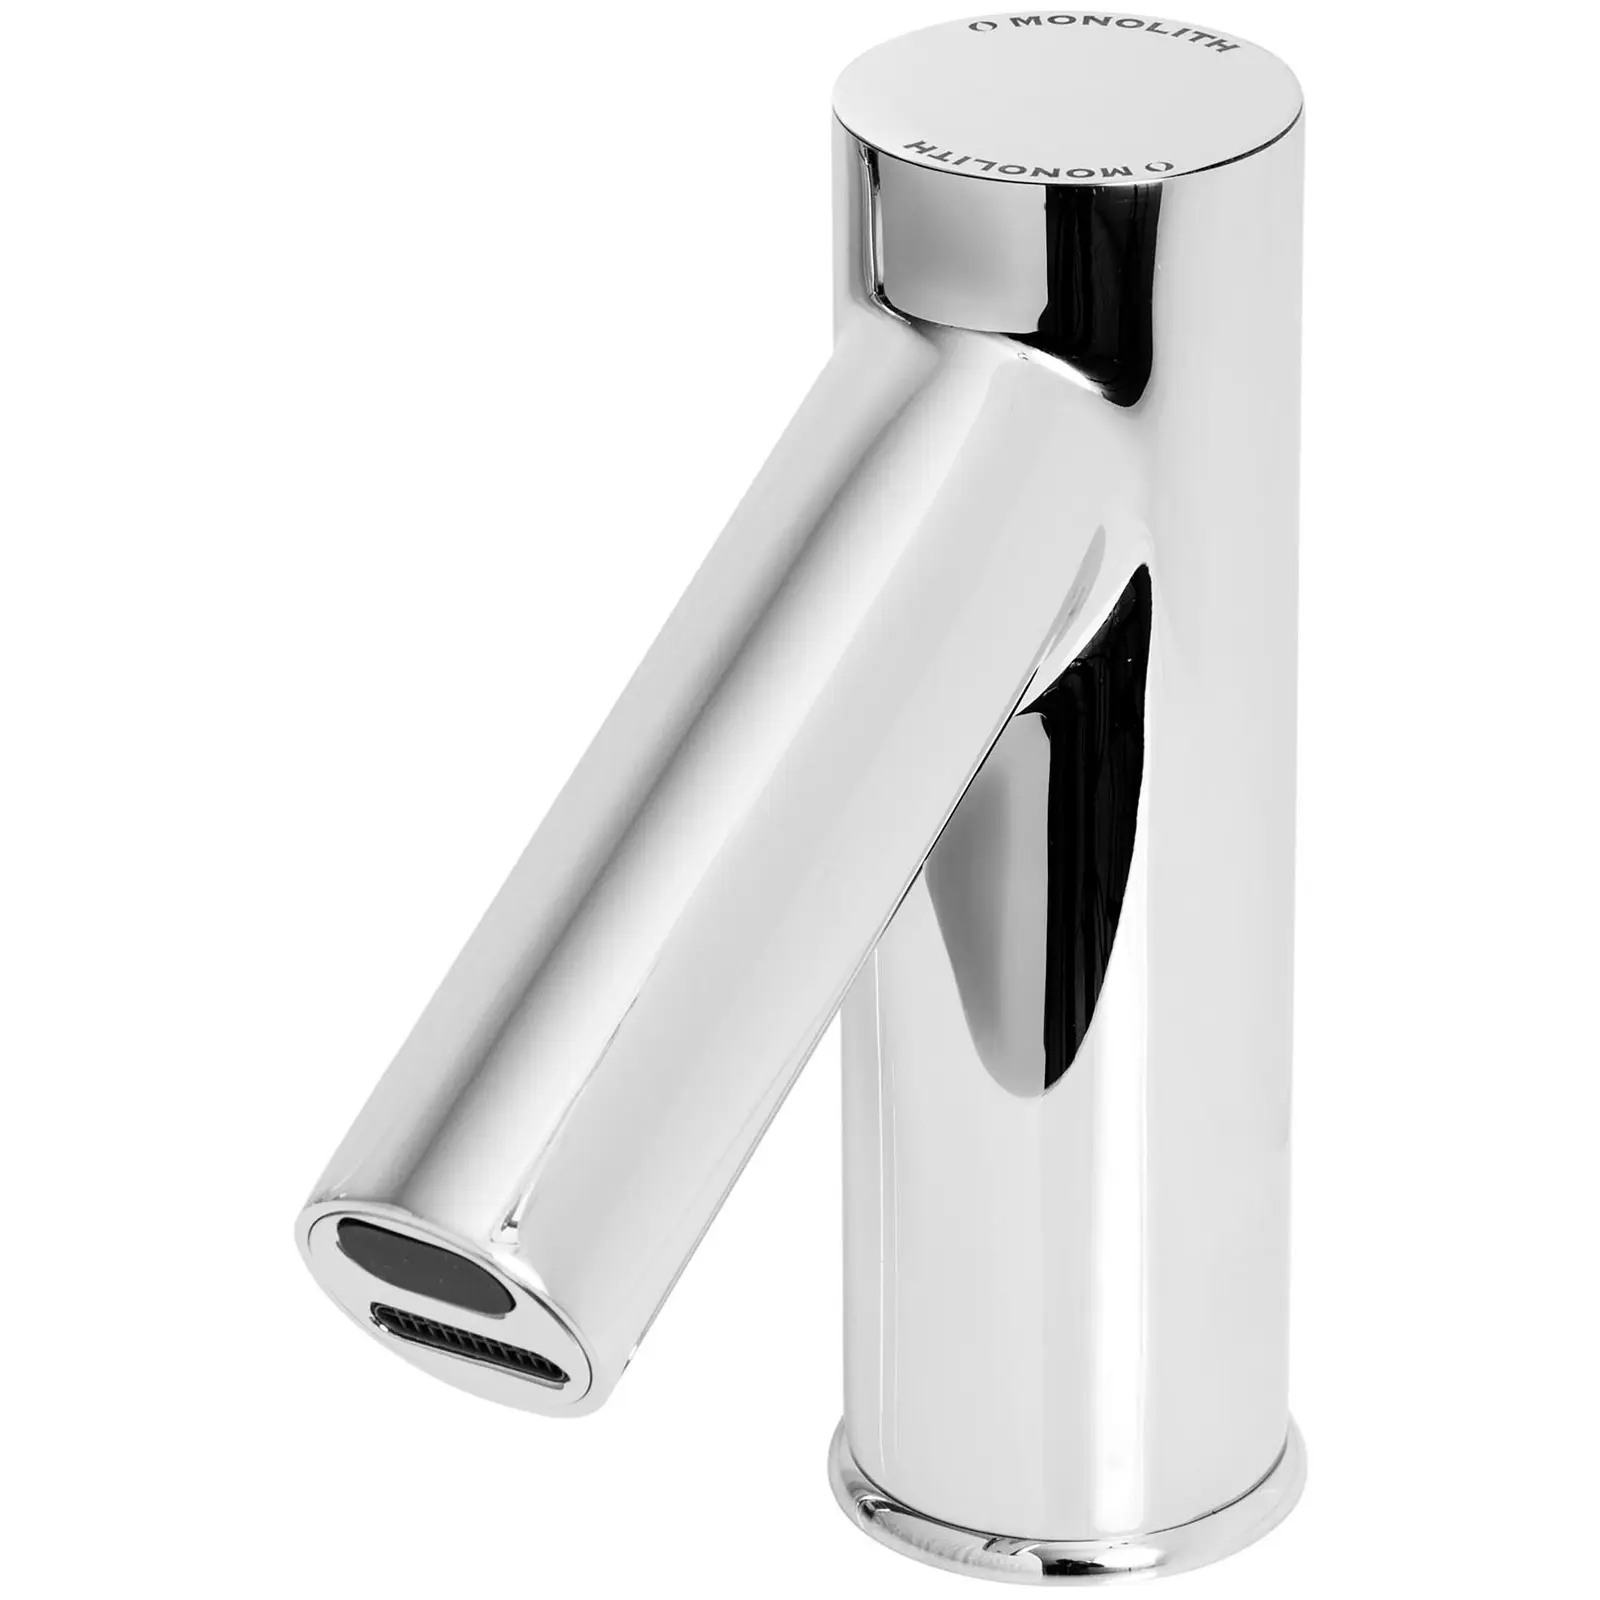 hands-free tap - Chrome-plated brass - tap length 120